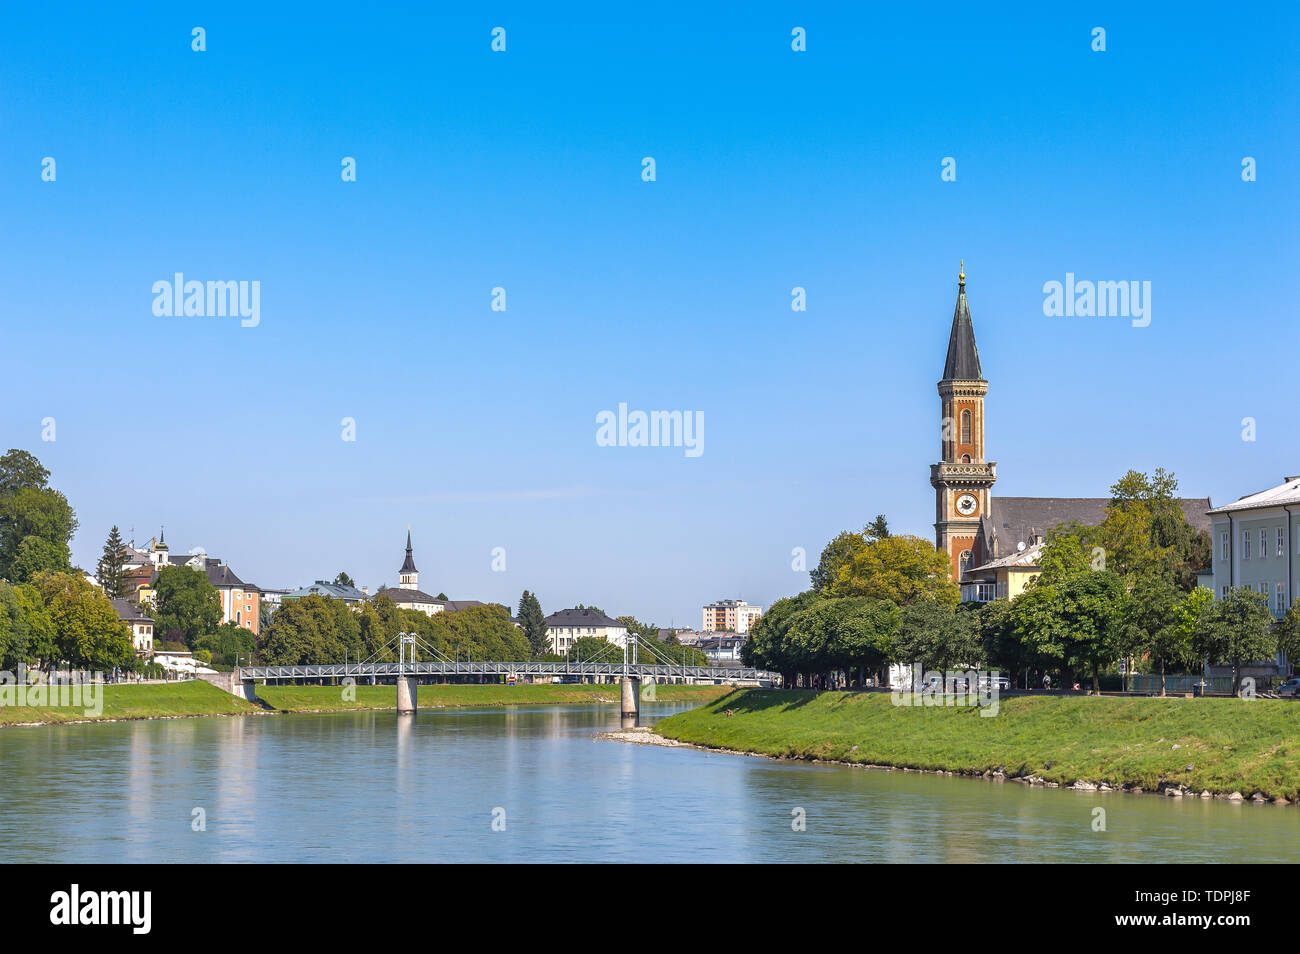 Picture of the Salzach River in Salzburg, the Centre of Salzburg is a UNESCO World Heritage Site and one of the most preserver historical city centers Stock Photo